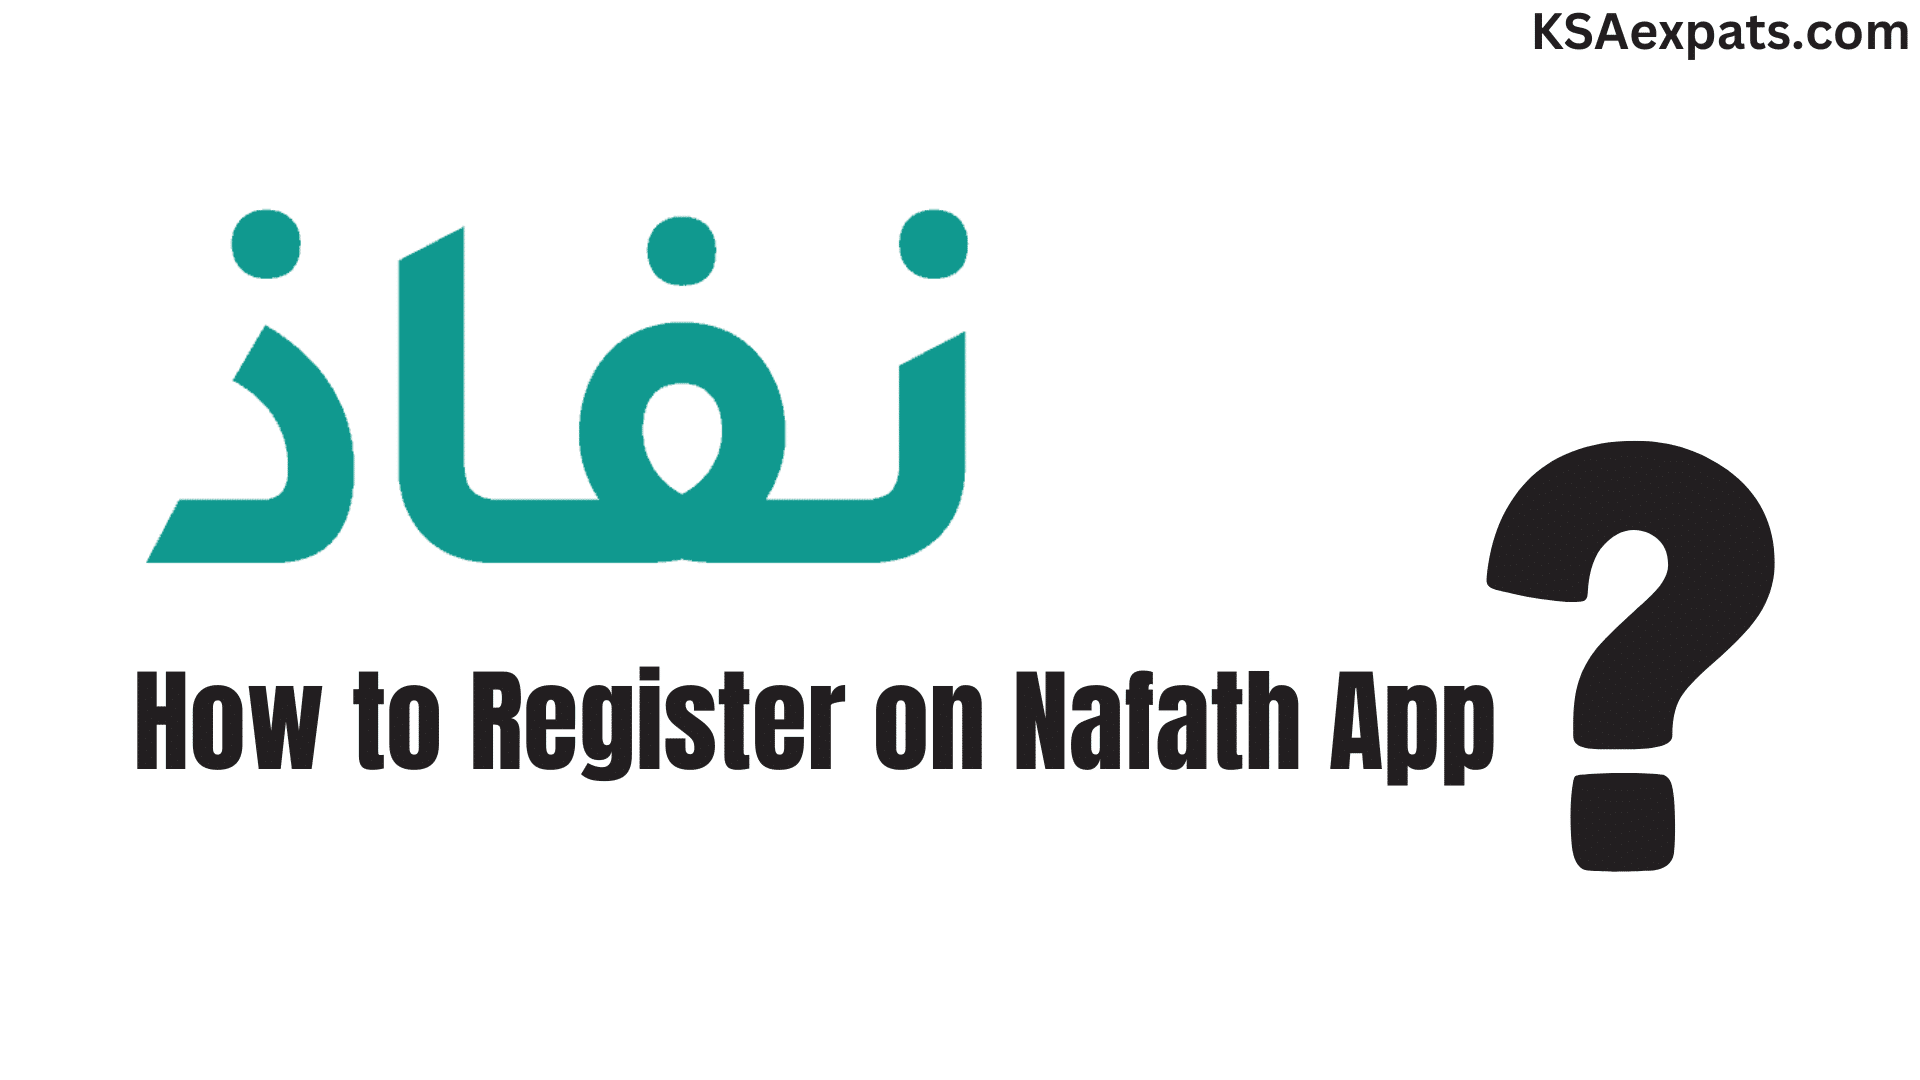 How to Register on Nafath App